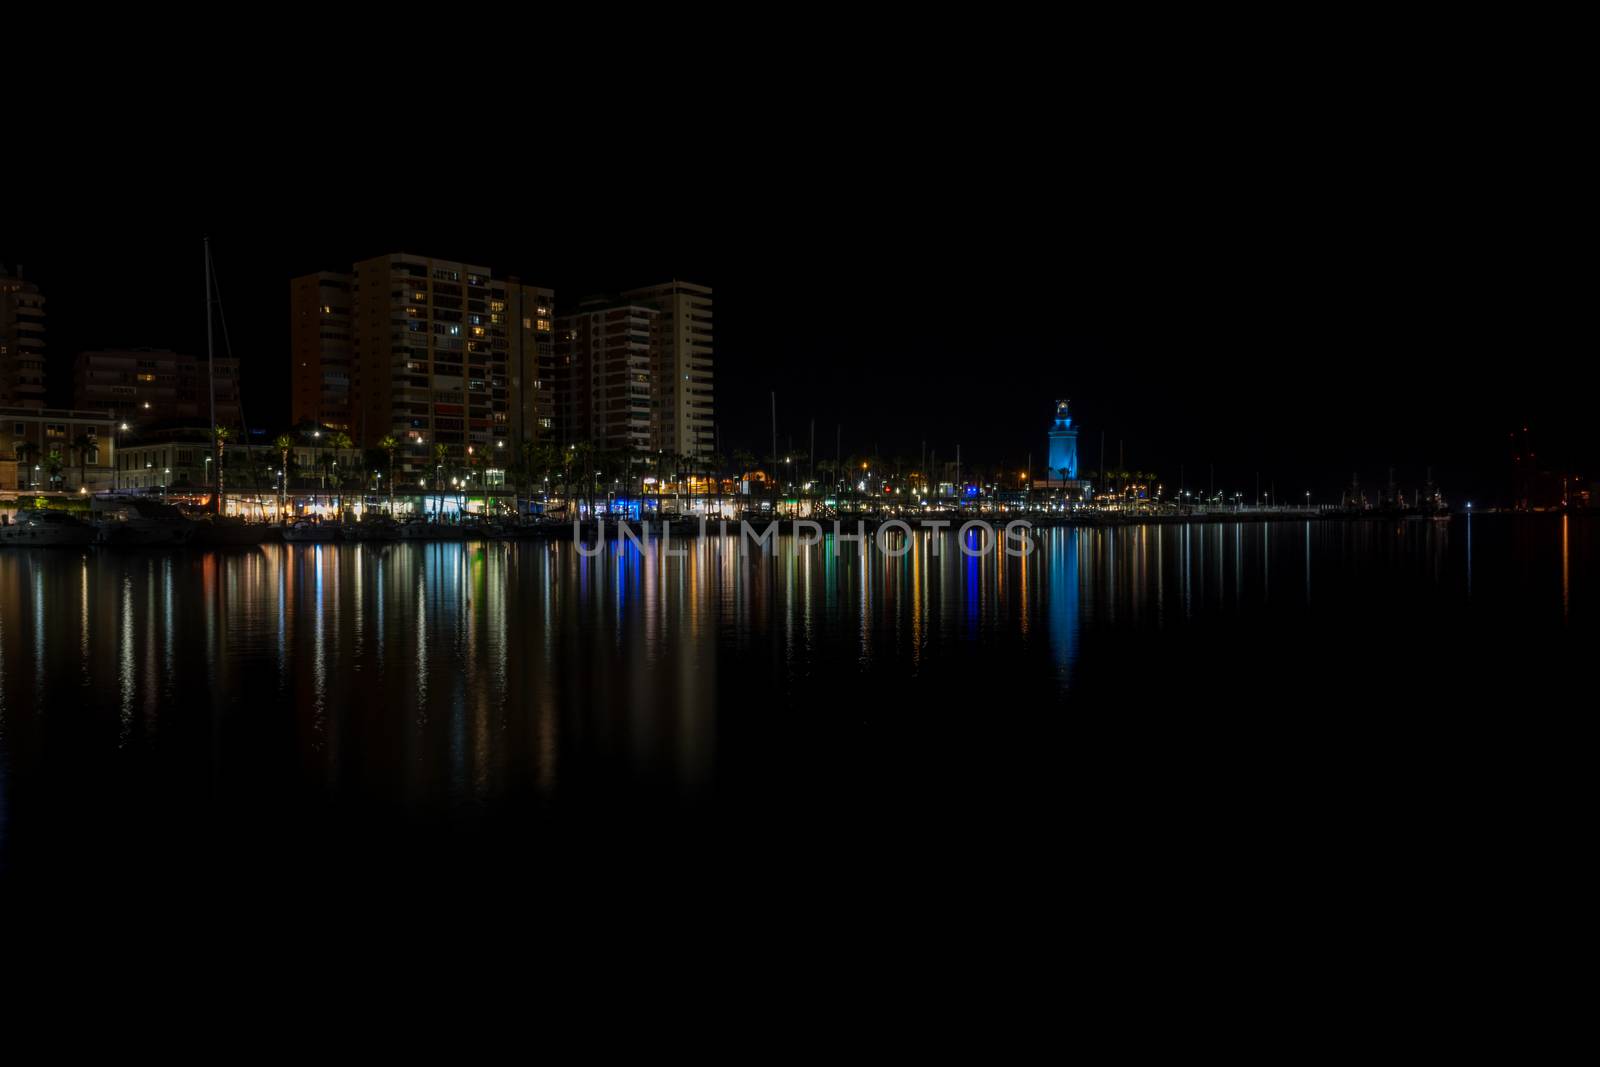 View of Malaga city and lighthouse and their reflections on water from harbour, Malaga, spain, Europe at night with illuminations